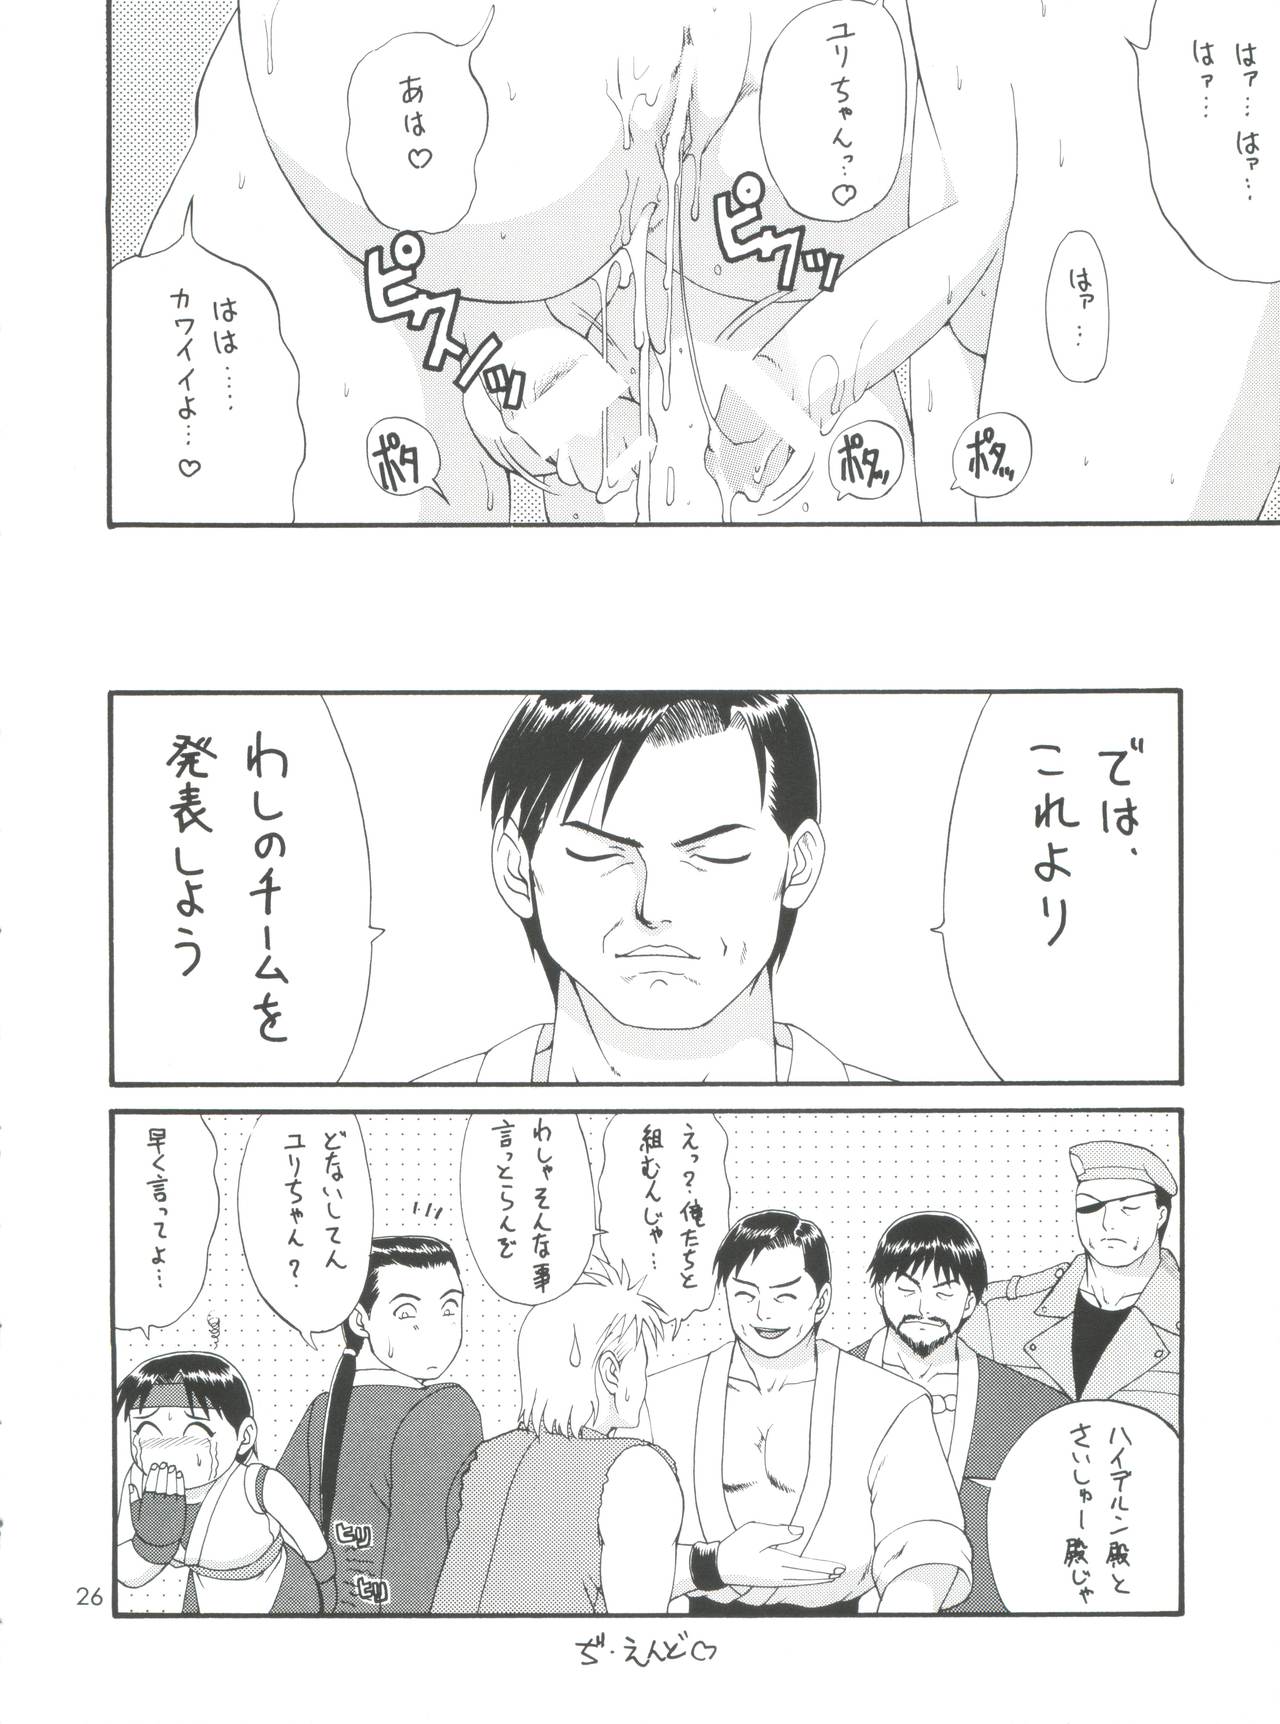 (CR24) [Saigado (Ishoku Dougen)] The Yuri & Friends '98 (King of Fighters) page 25 full